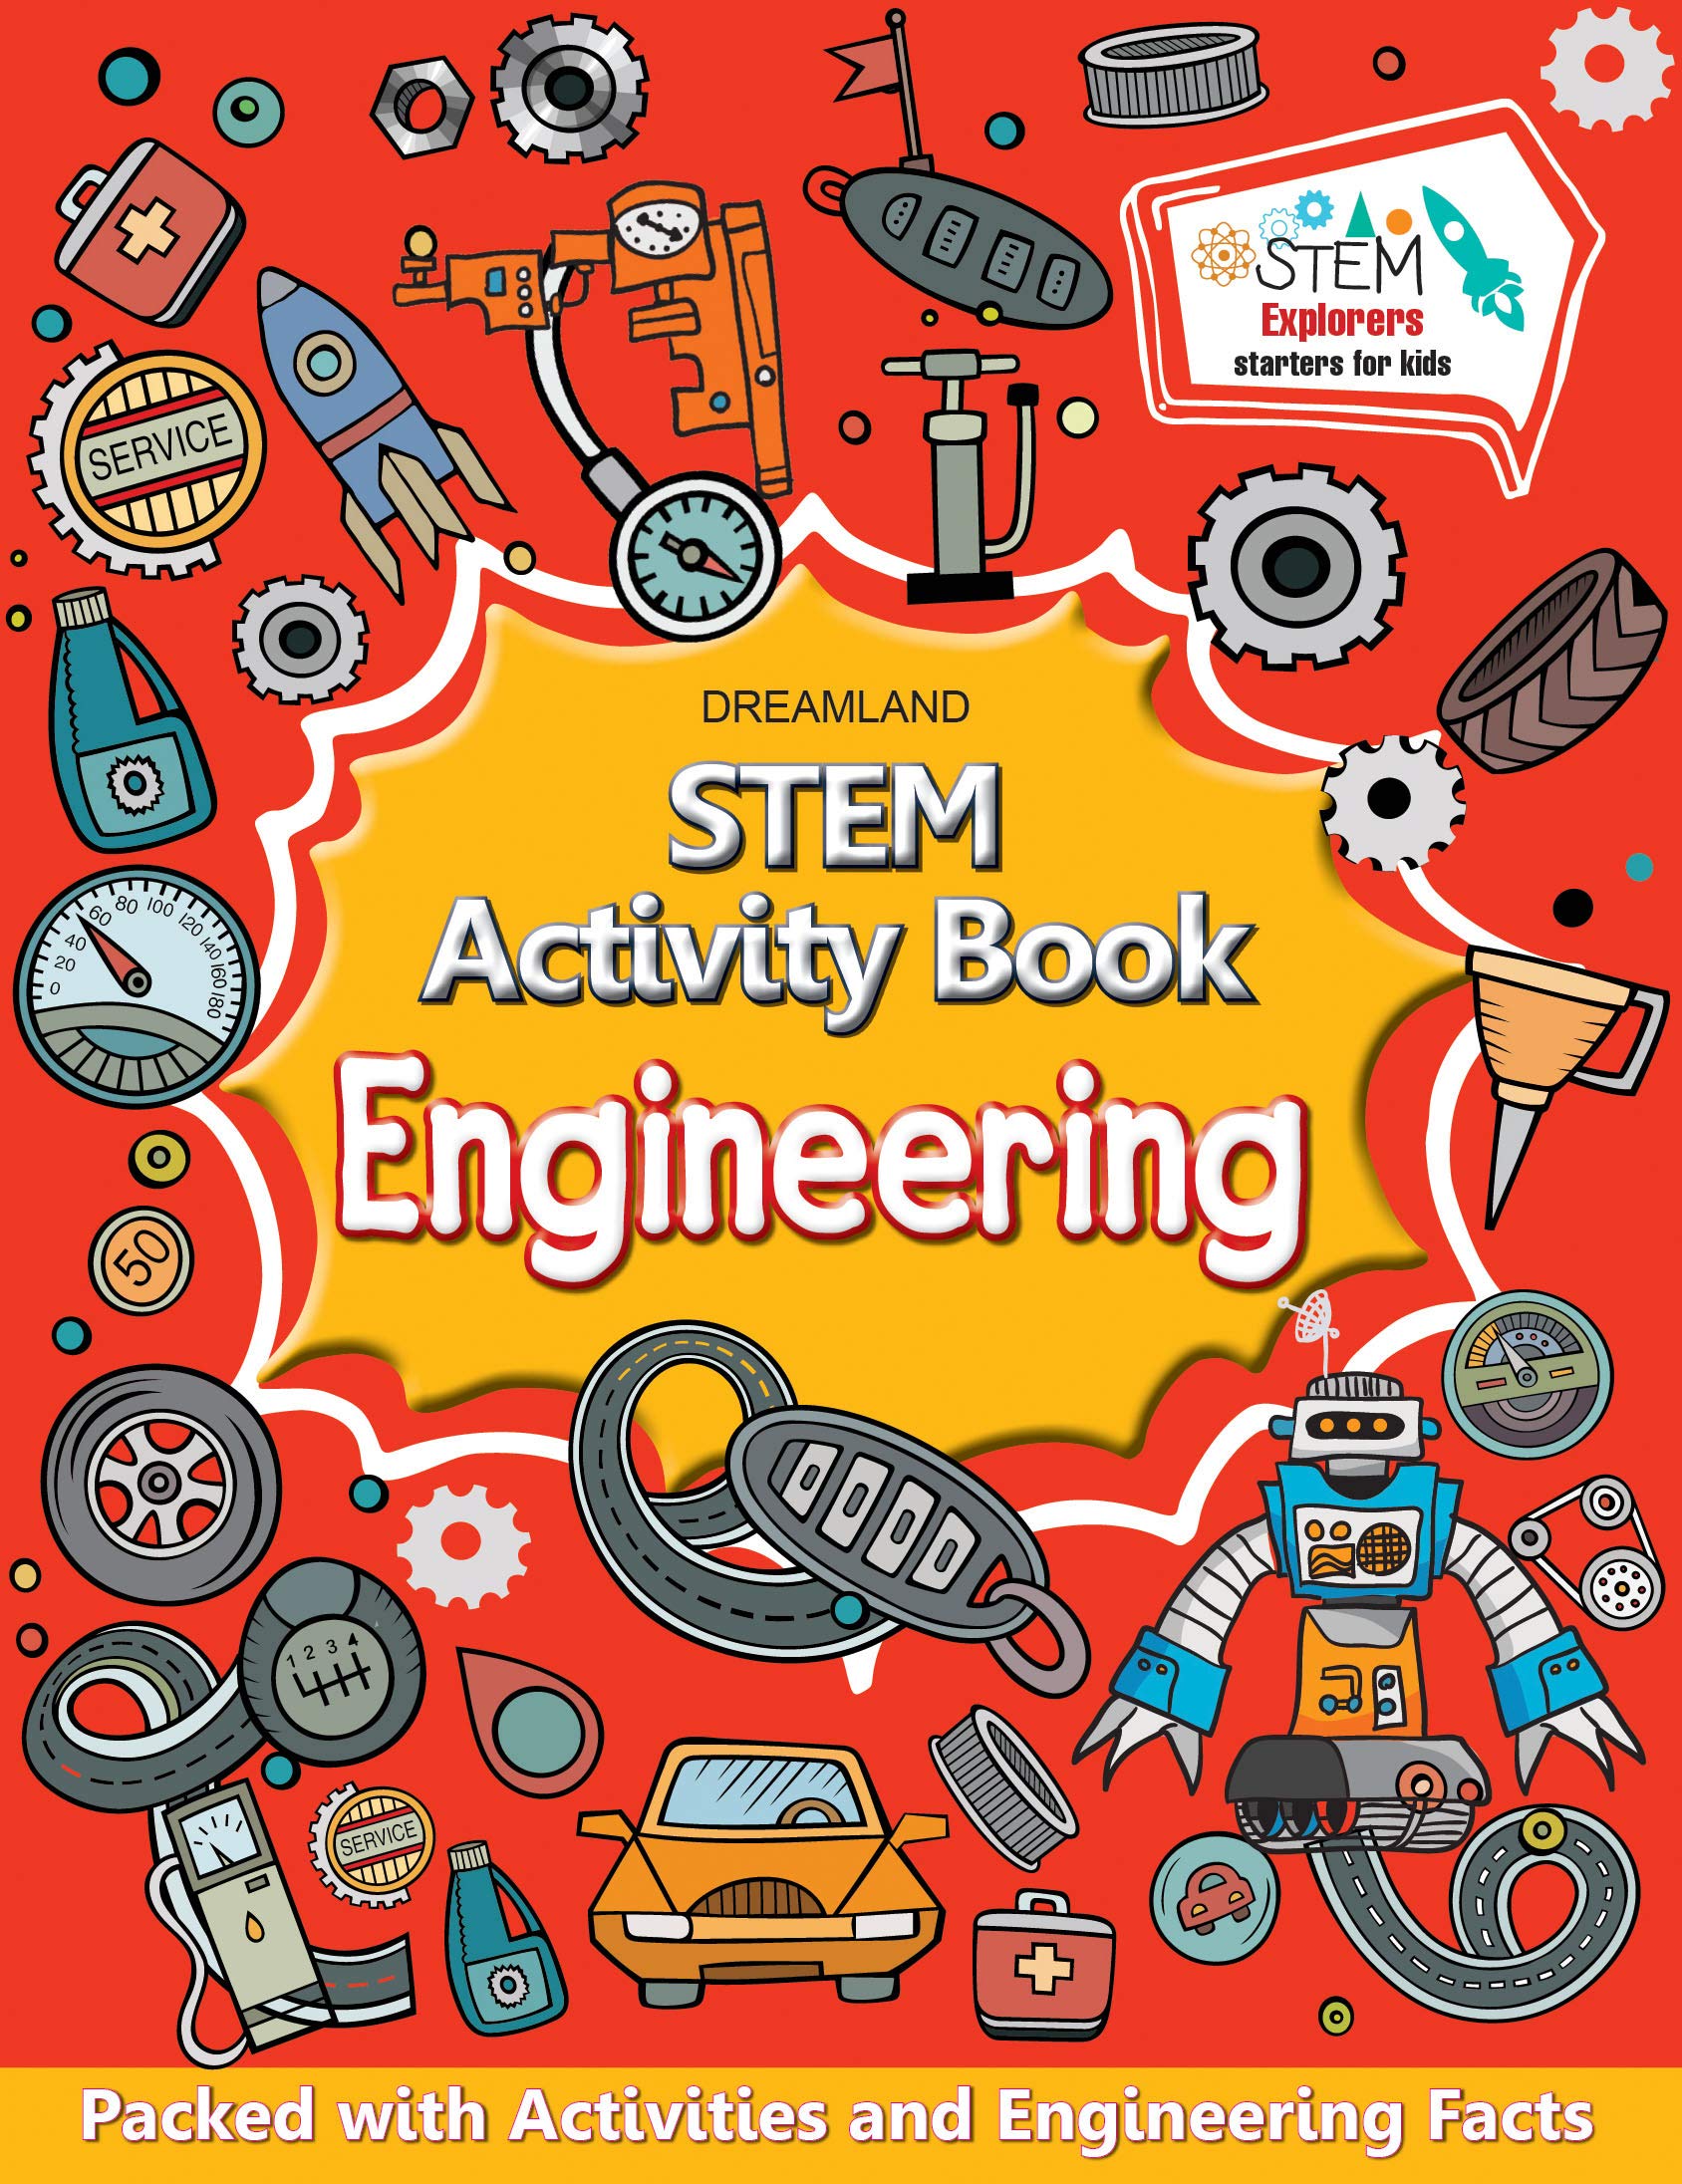 Engineering - STEM Activity Book for Children Age 6-12 years